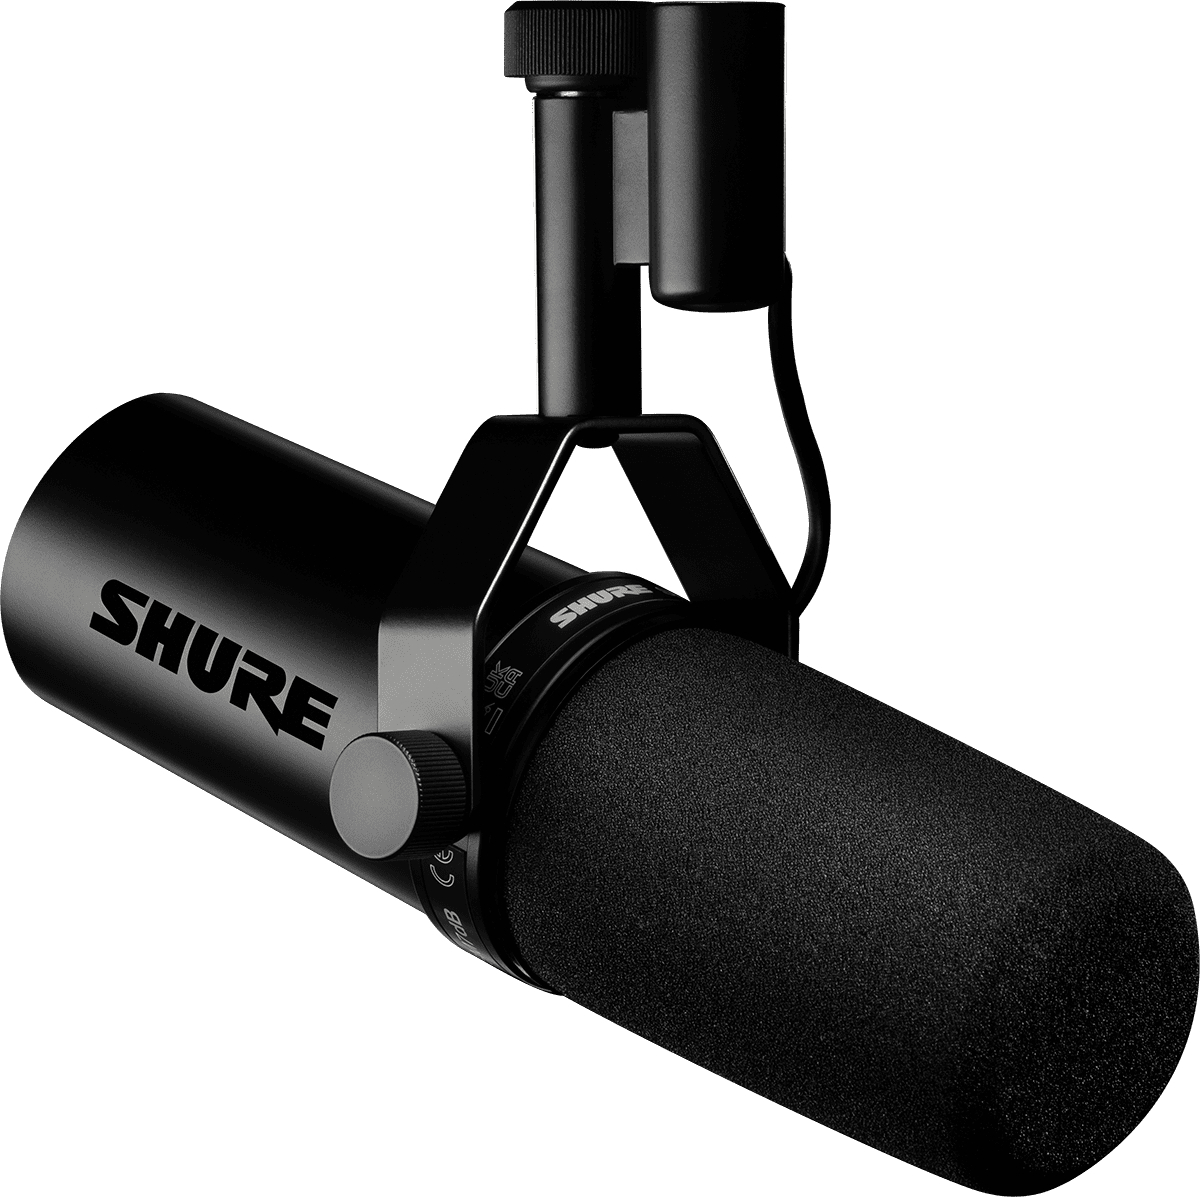 Shure Sm7db - Microphone podcast / radio - Main picture